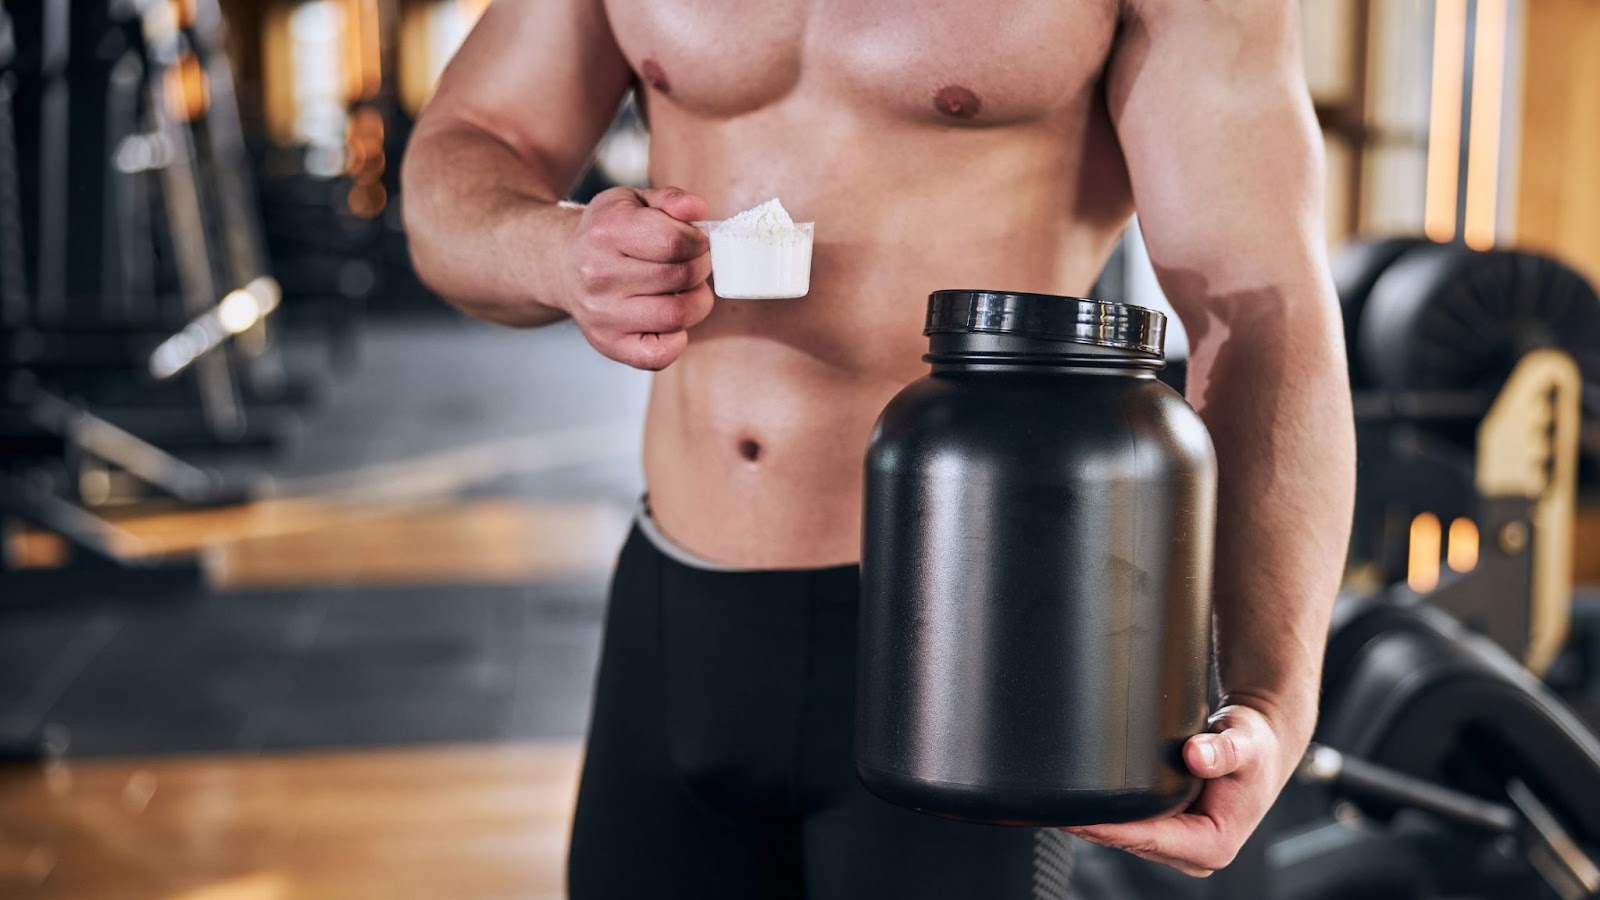 Is it a bad idea to down a pre-workout without working out?